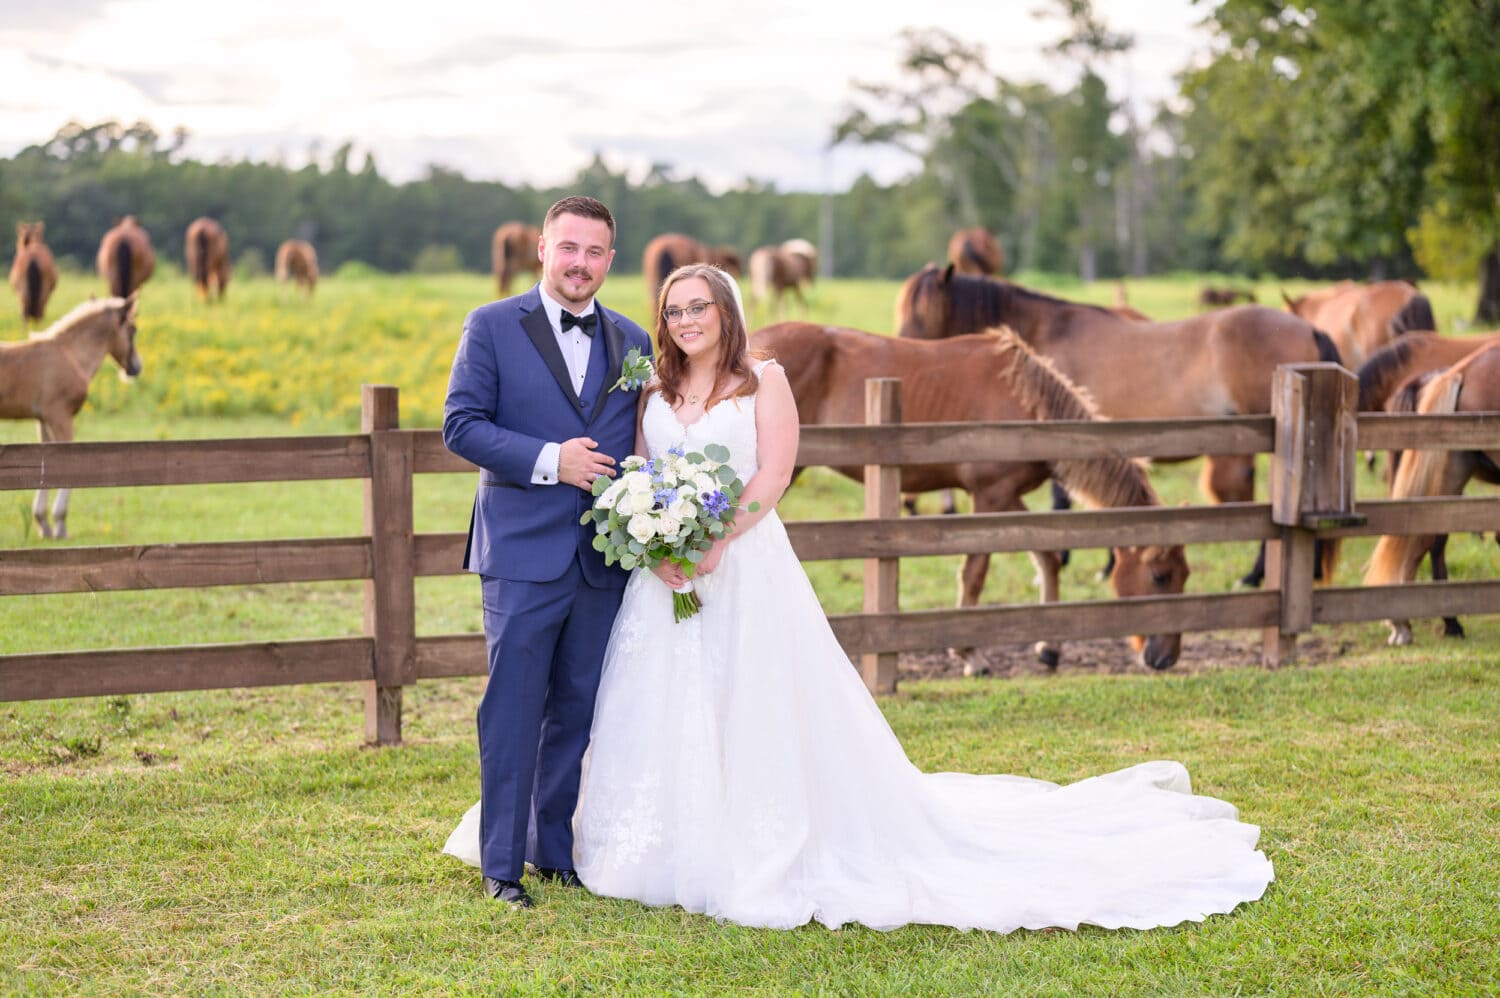 Formal portrait of bride and groom standing in front of the wild horses - Wildhorse at Parker Farms